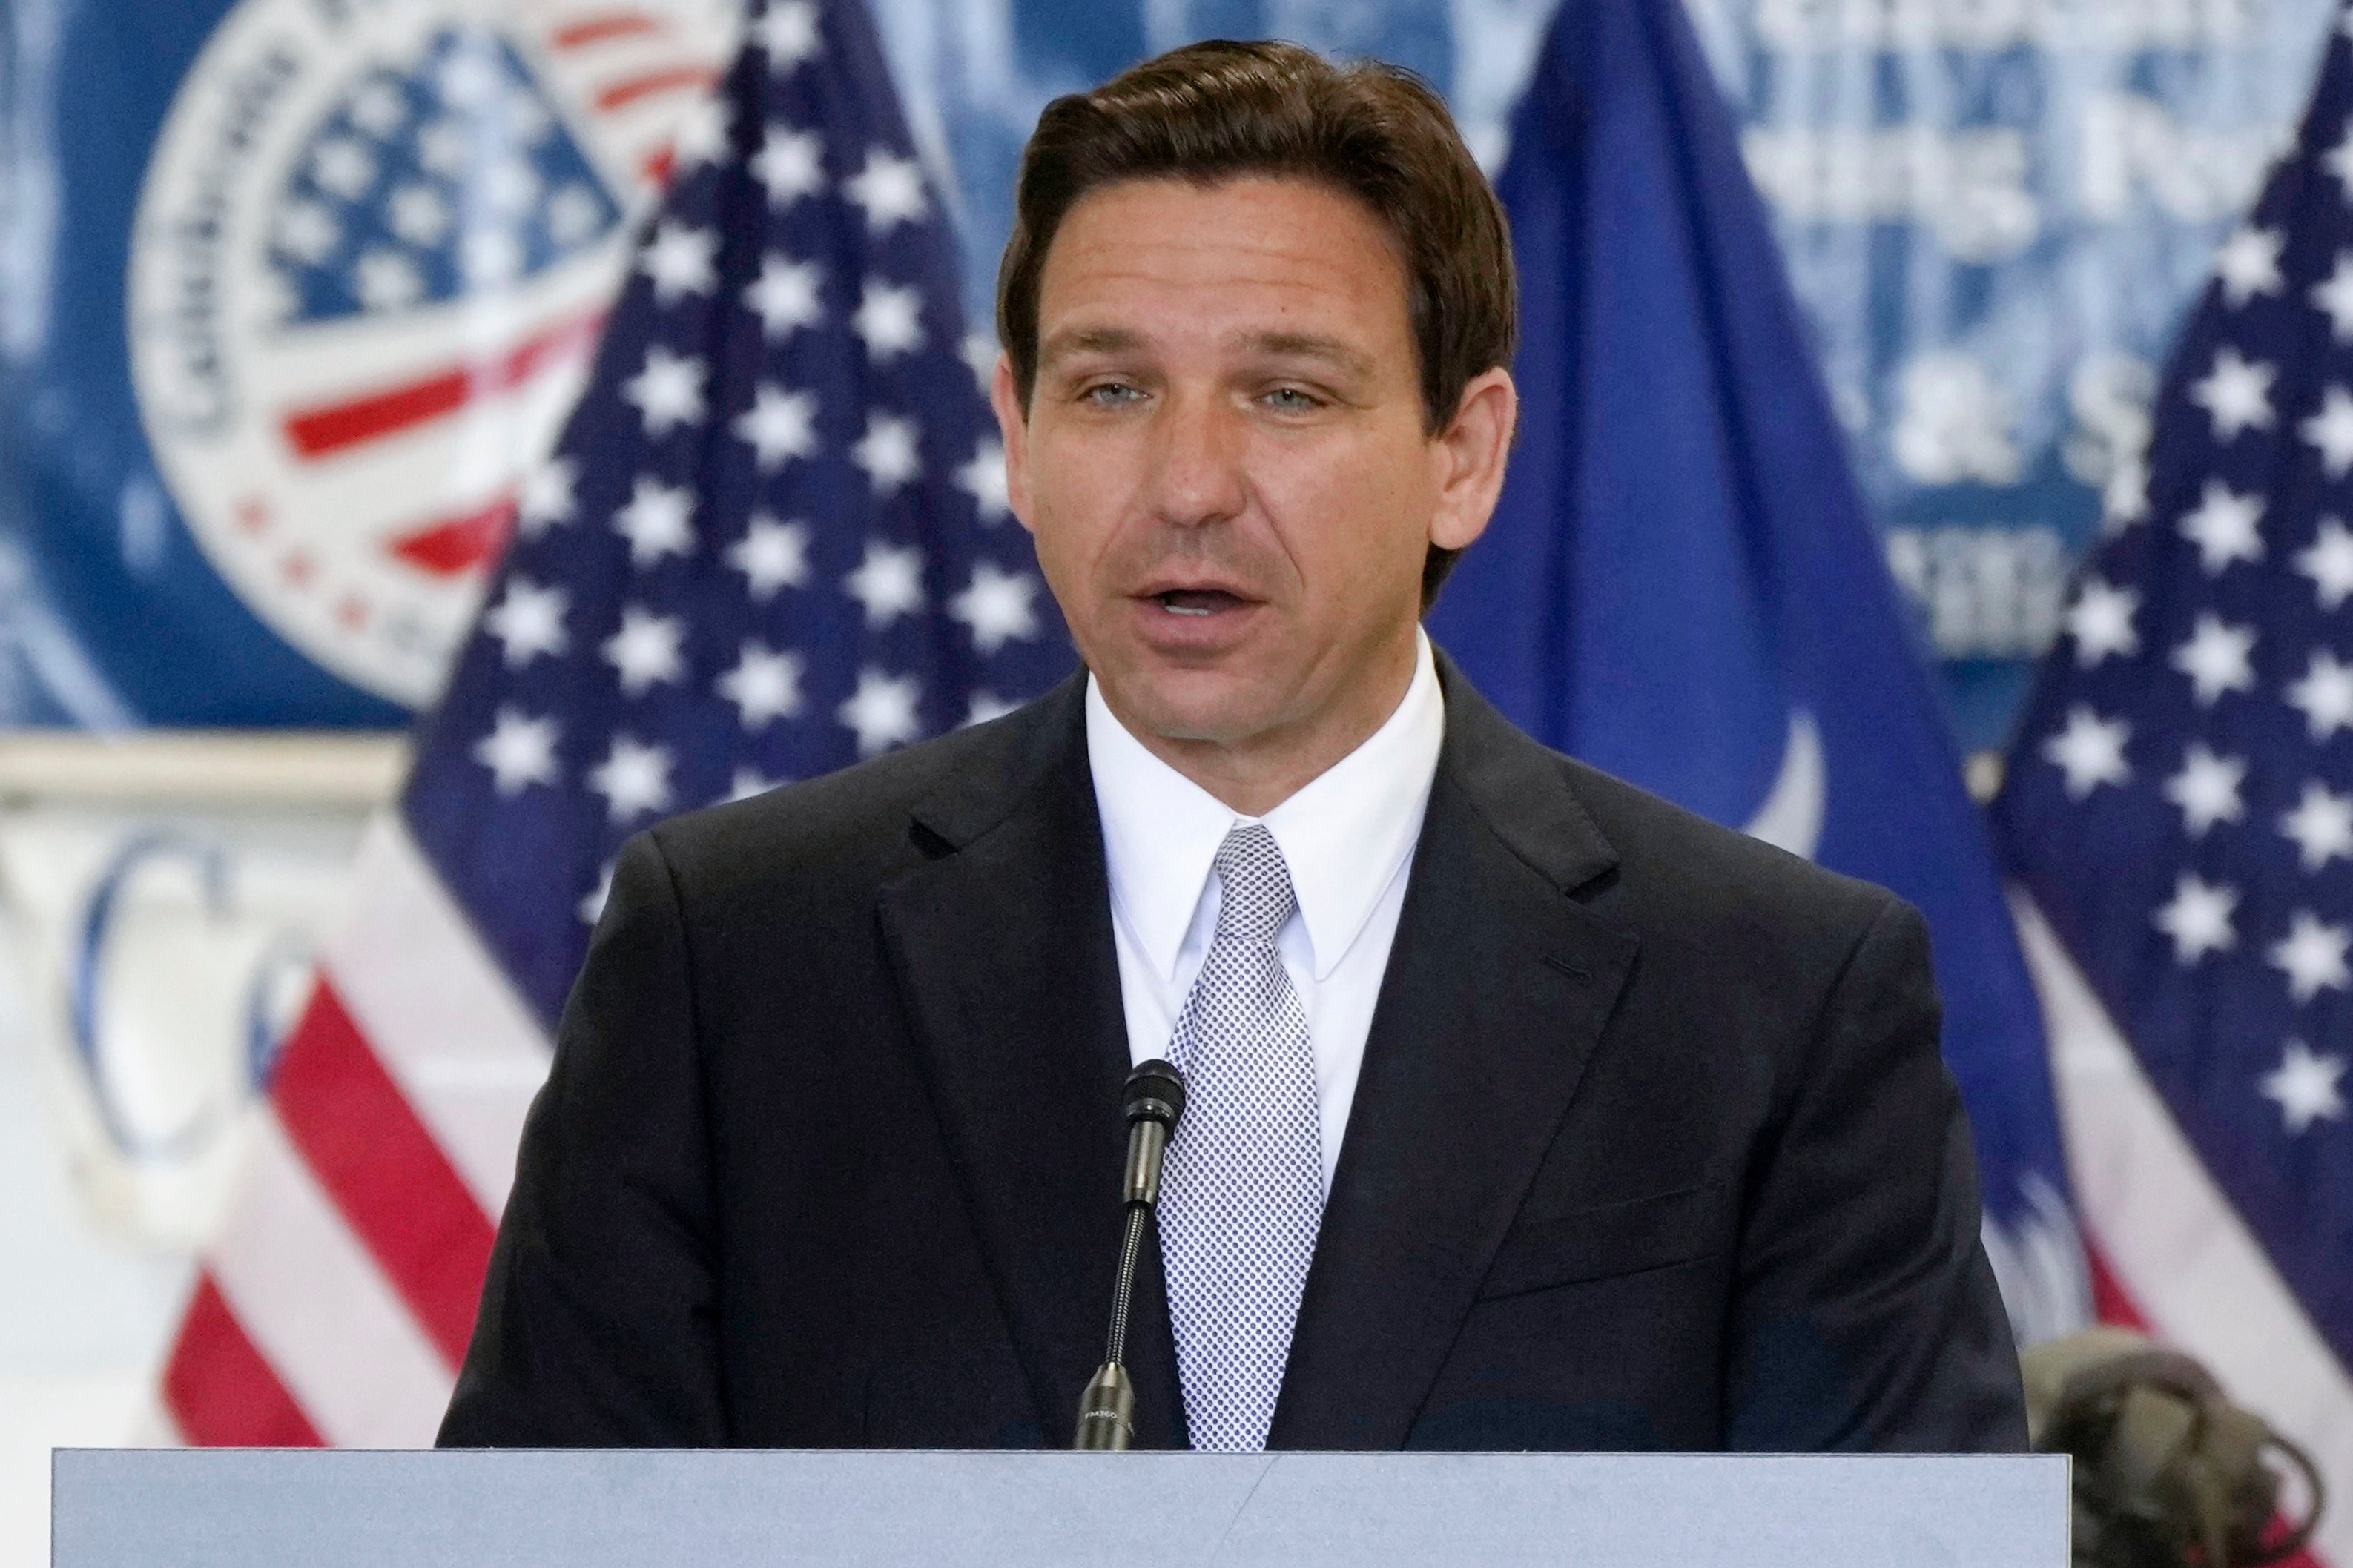 DeSantis takes his presidential campaign to Utah, a heavily GOP state